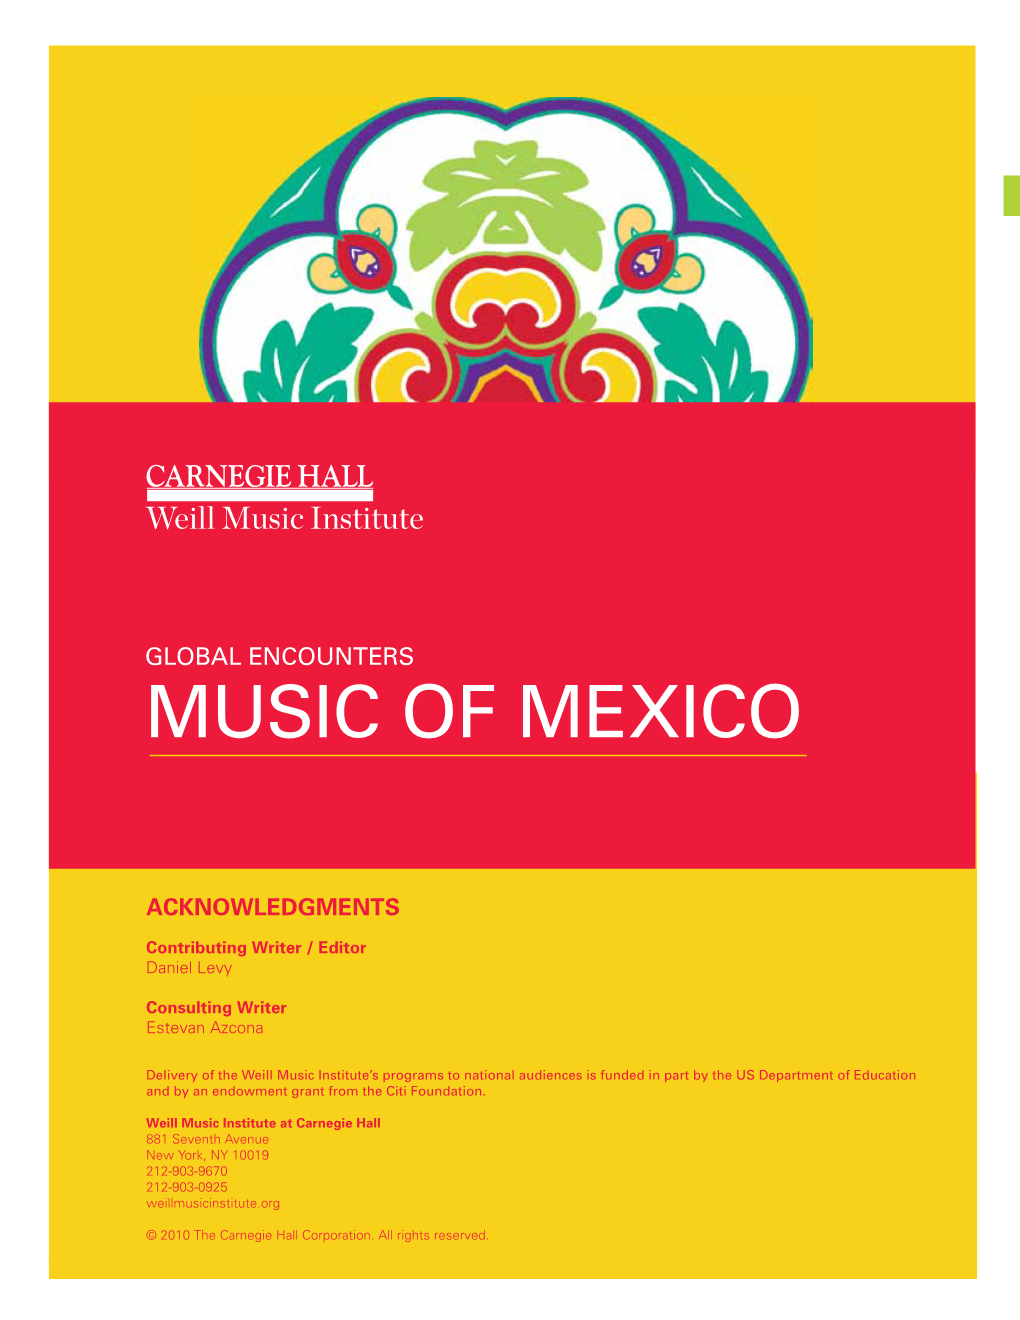 Music of Mexico